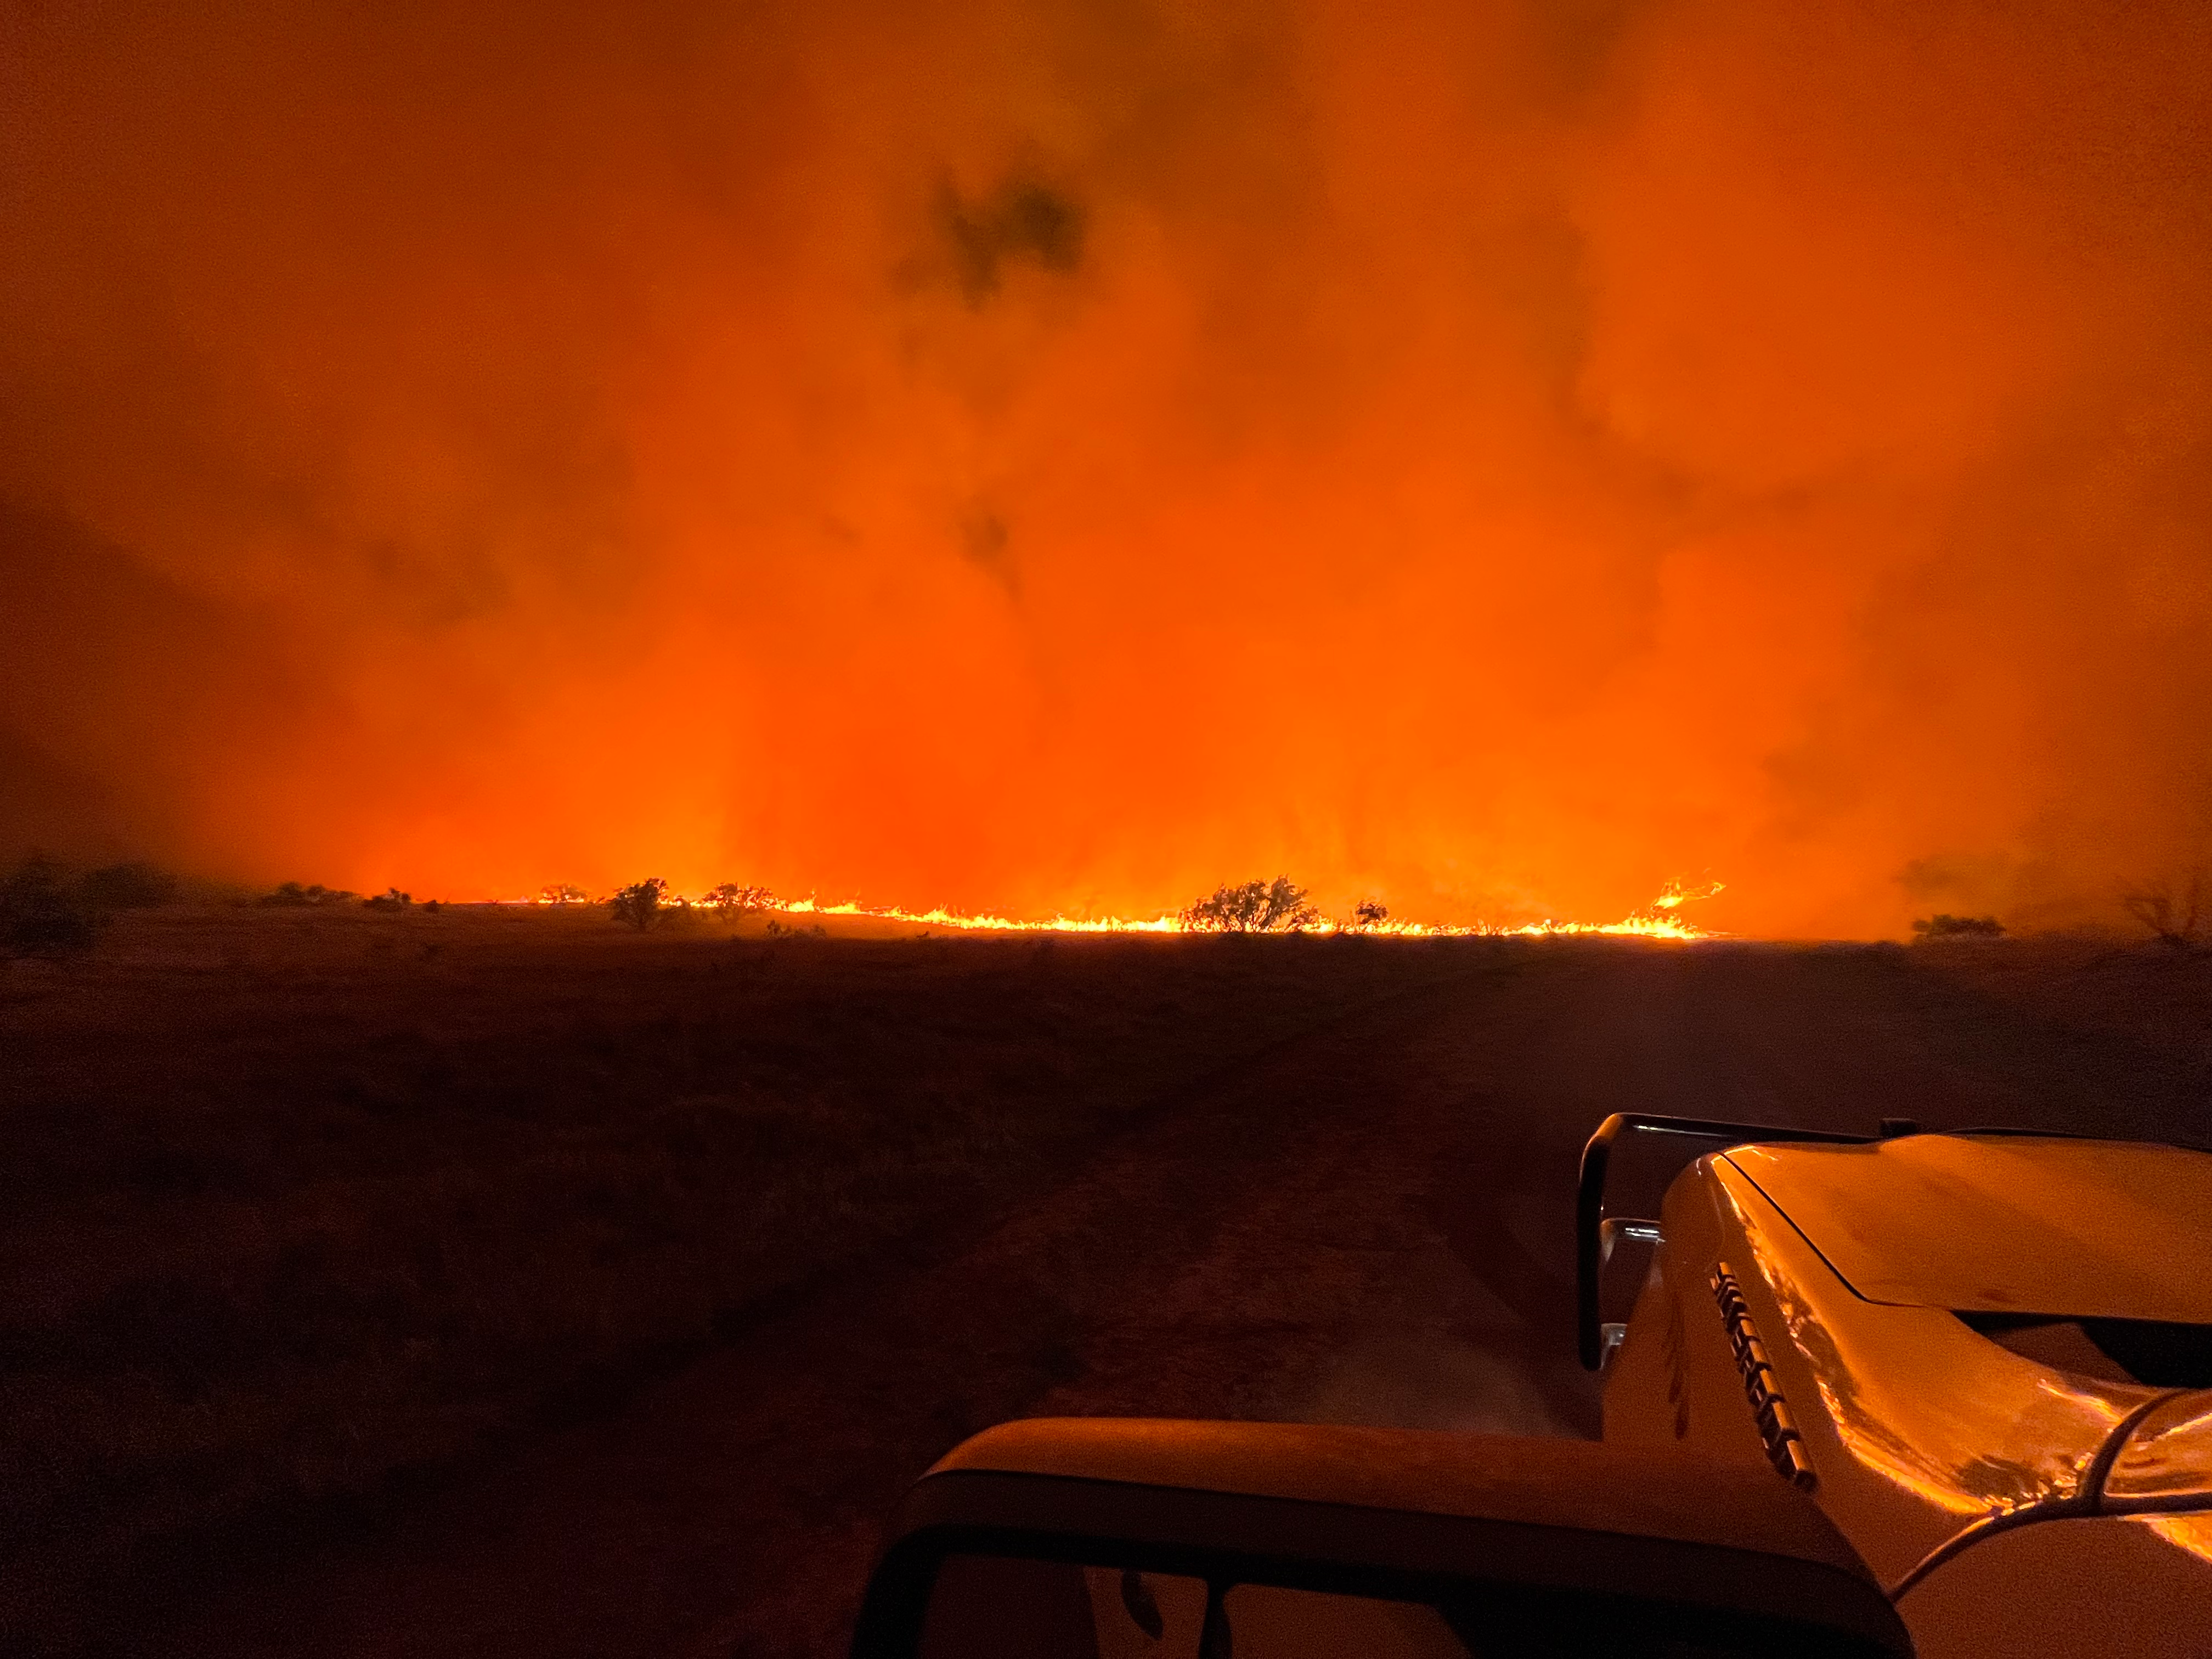 Picture shows the pasture burning fast during the night wind shift